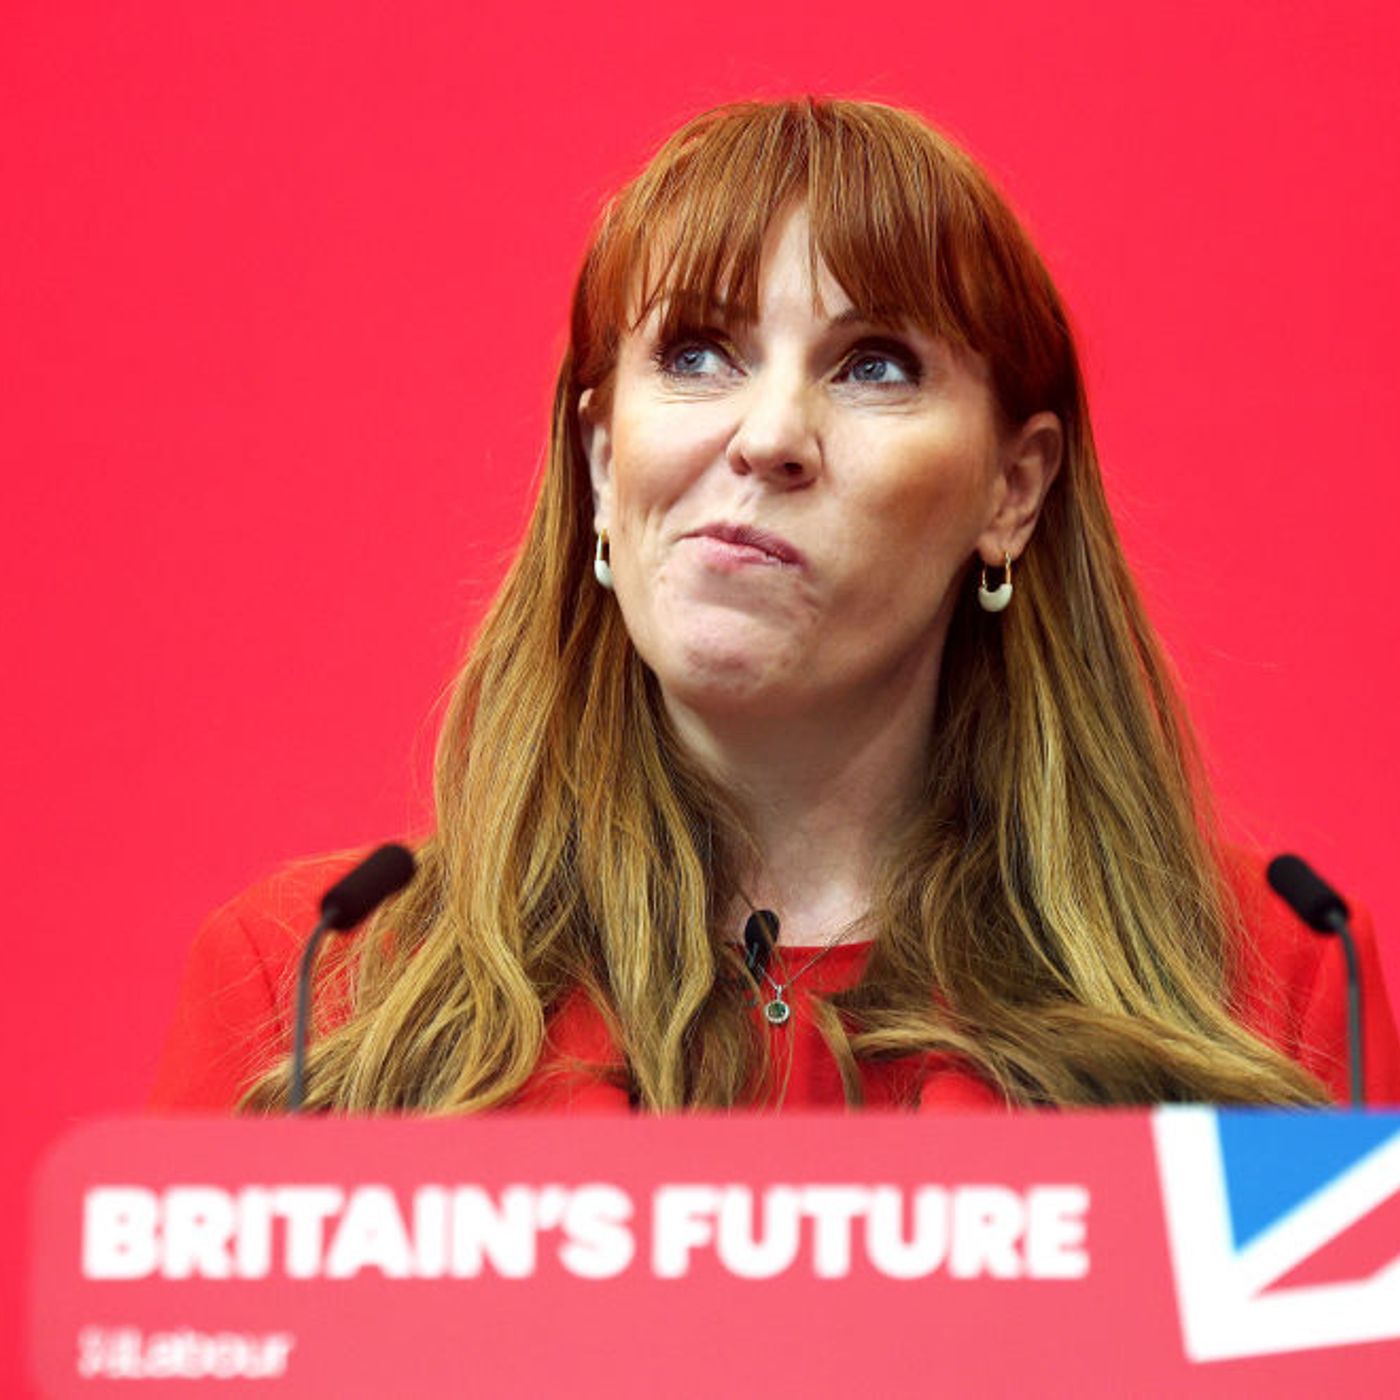 How much trouble is Angela Rayner in?